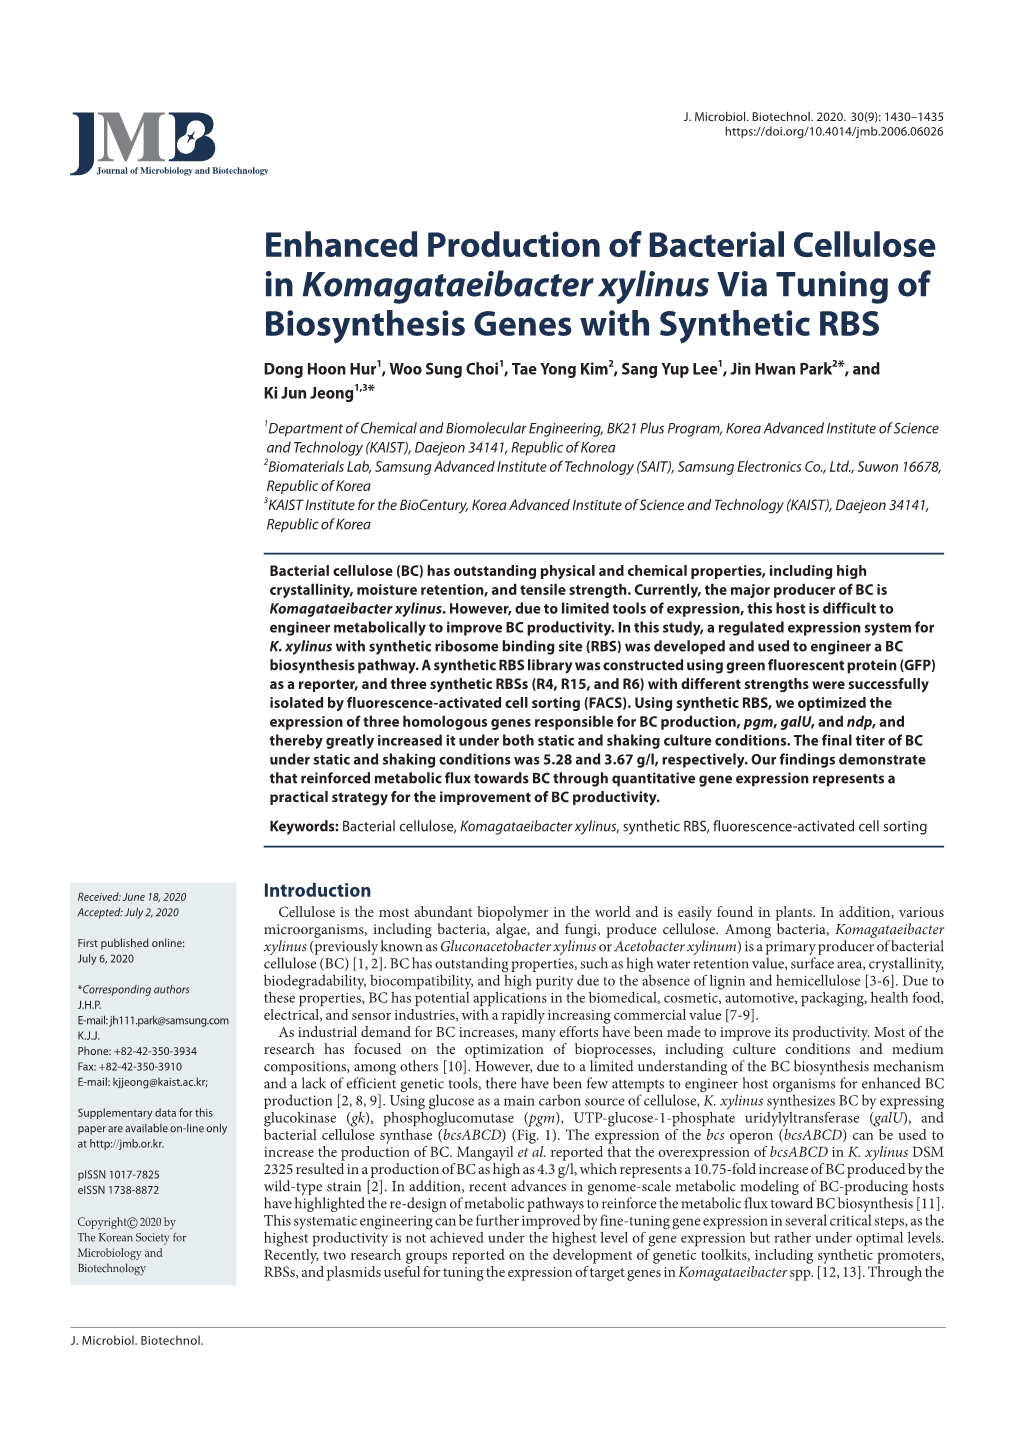 Enhanced Production of Bacterial Cellulose in Komagataeibacter Xylinus Via Tuning of Biosynthesis Genes with Synthetic RBS